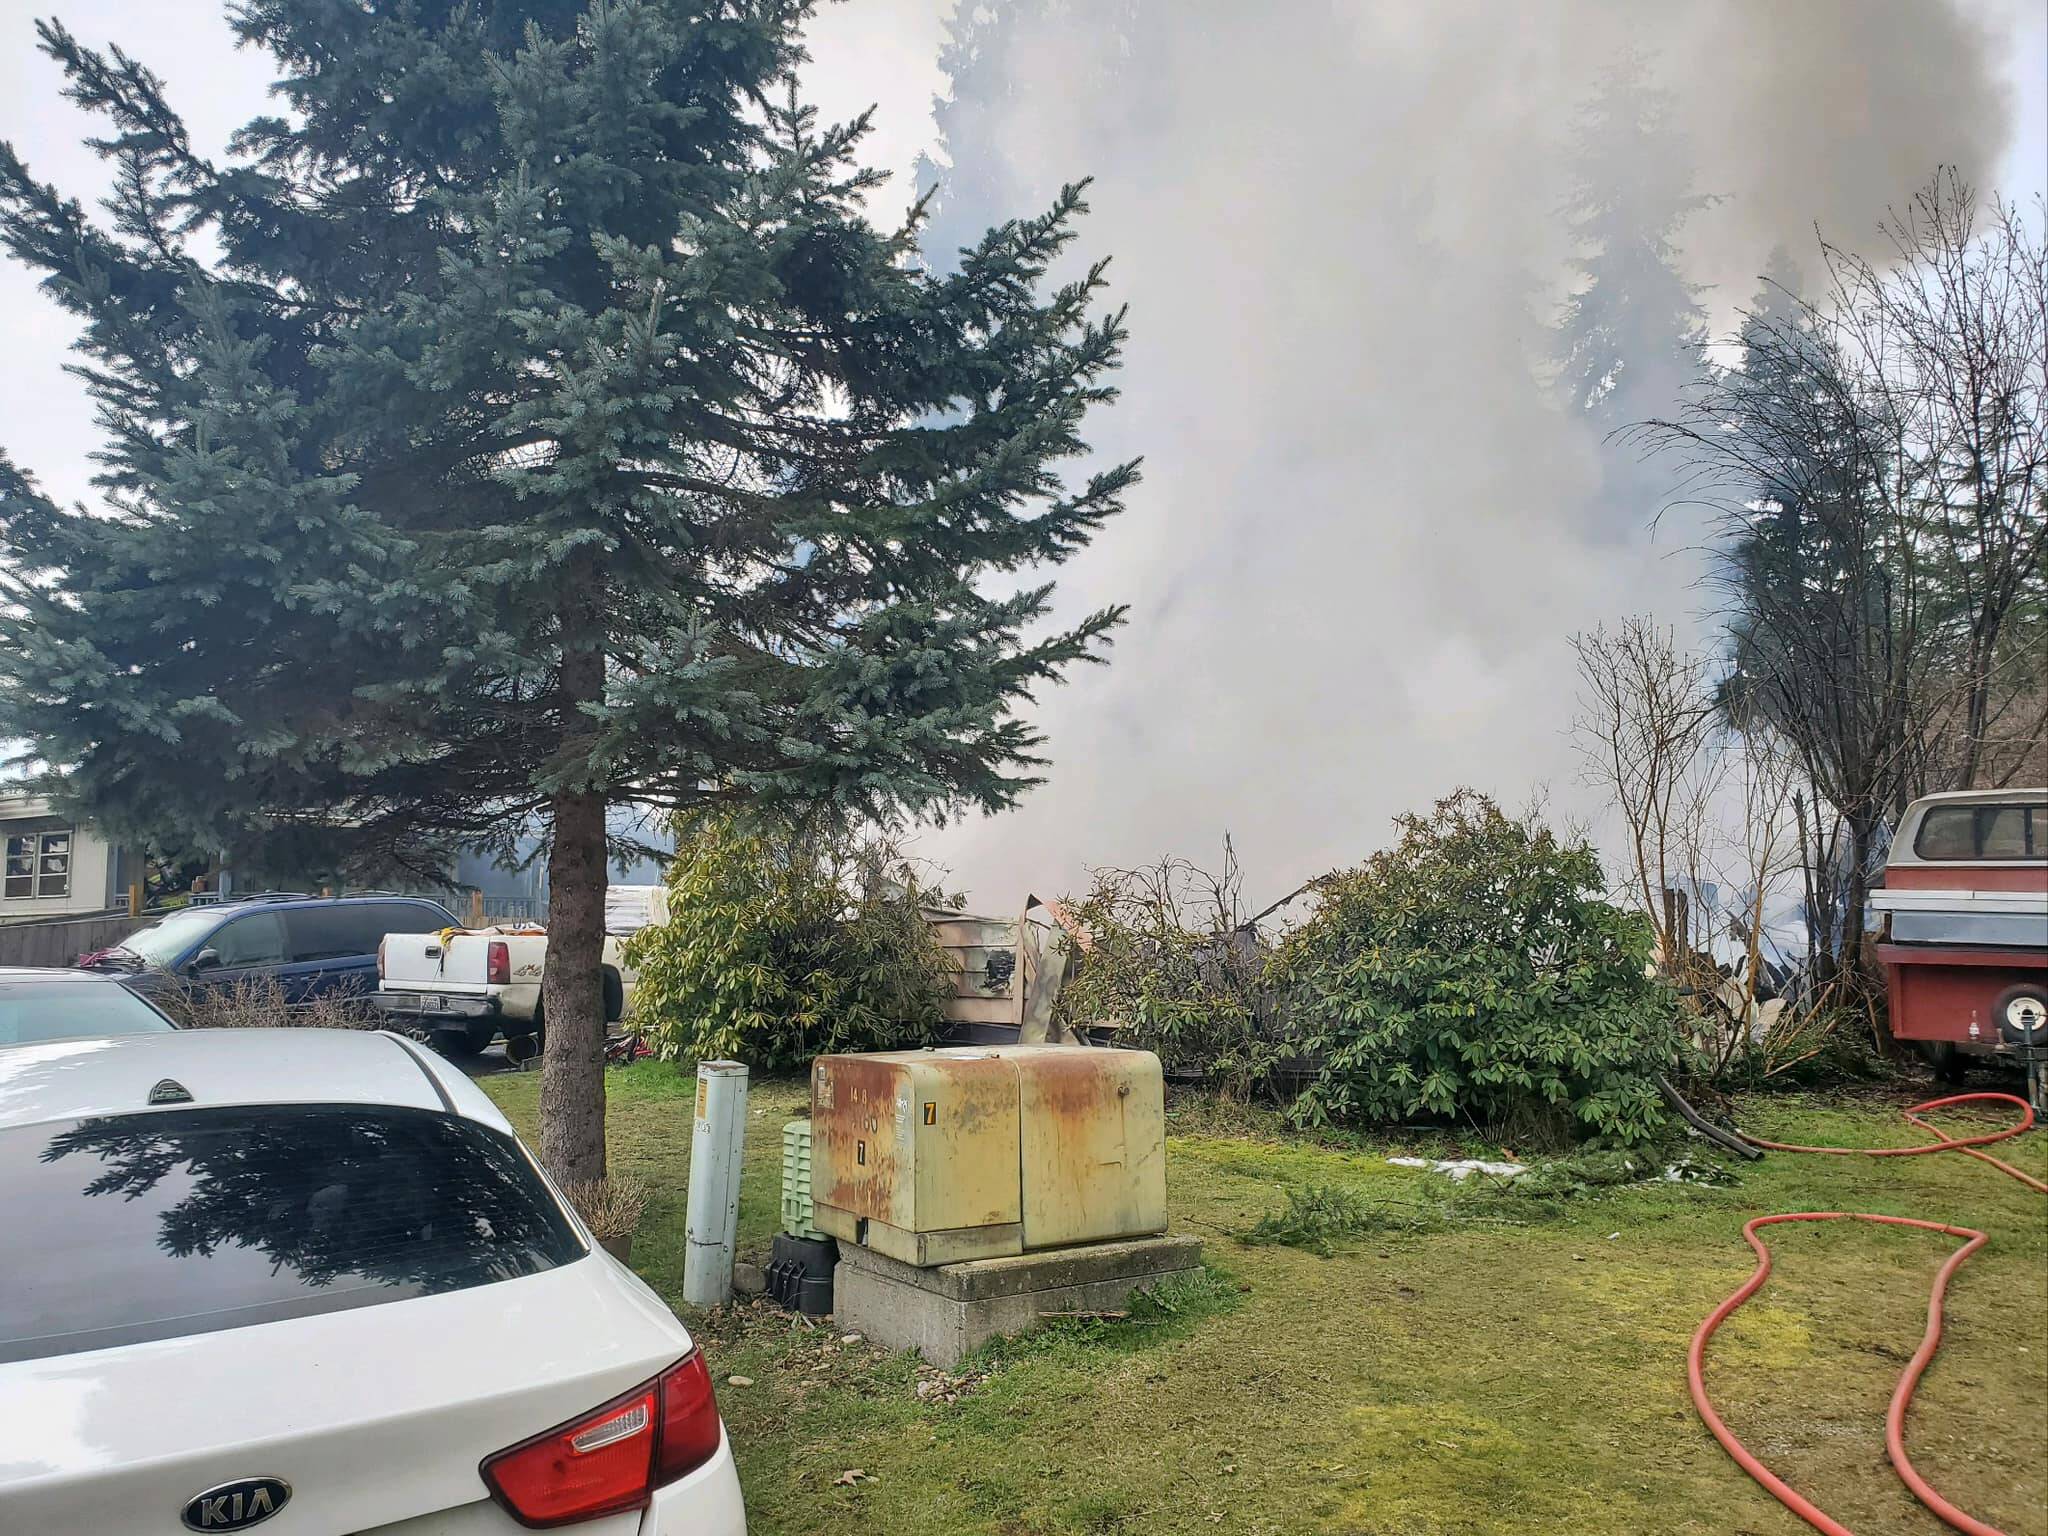 A fire at a residence spread to a tree and destroyed a second residence south of Elma on 25 February. (Courtesy photo / East Grays Harbor Fire and Rescue)